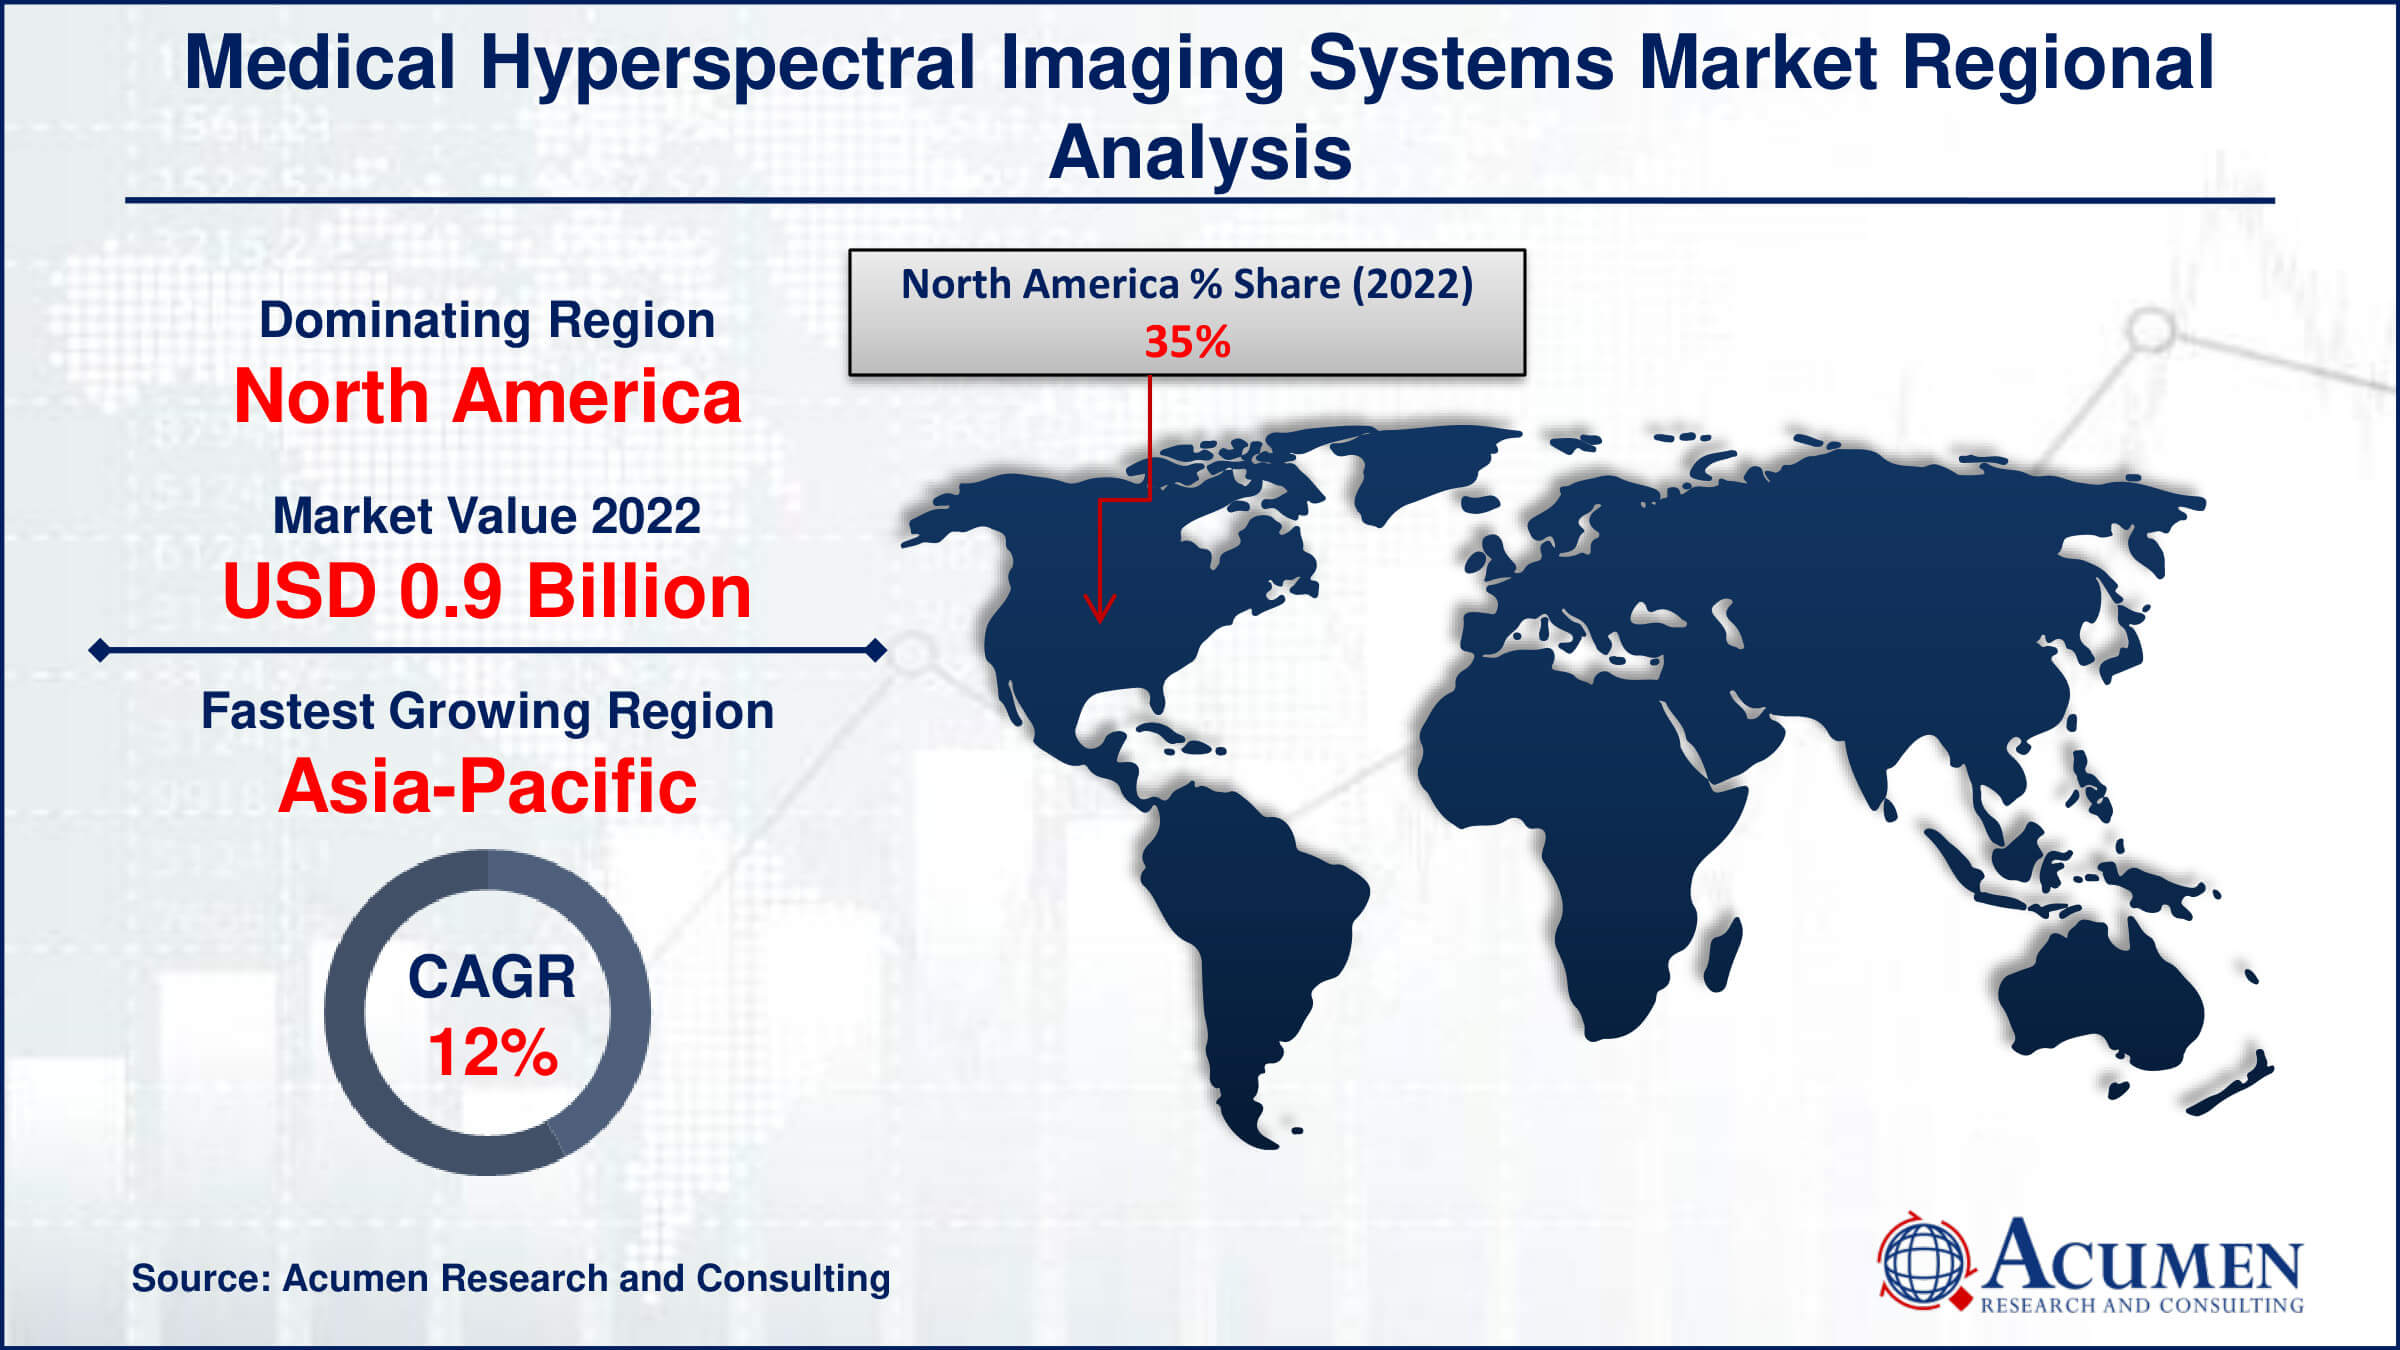 Medical Hyperspectral Imaging Systems Market Drivers